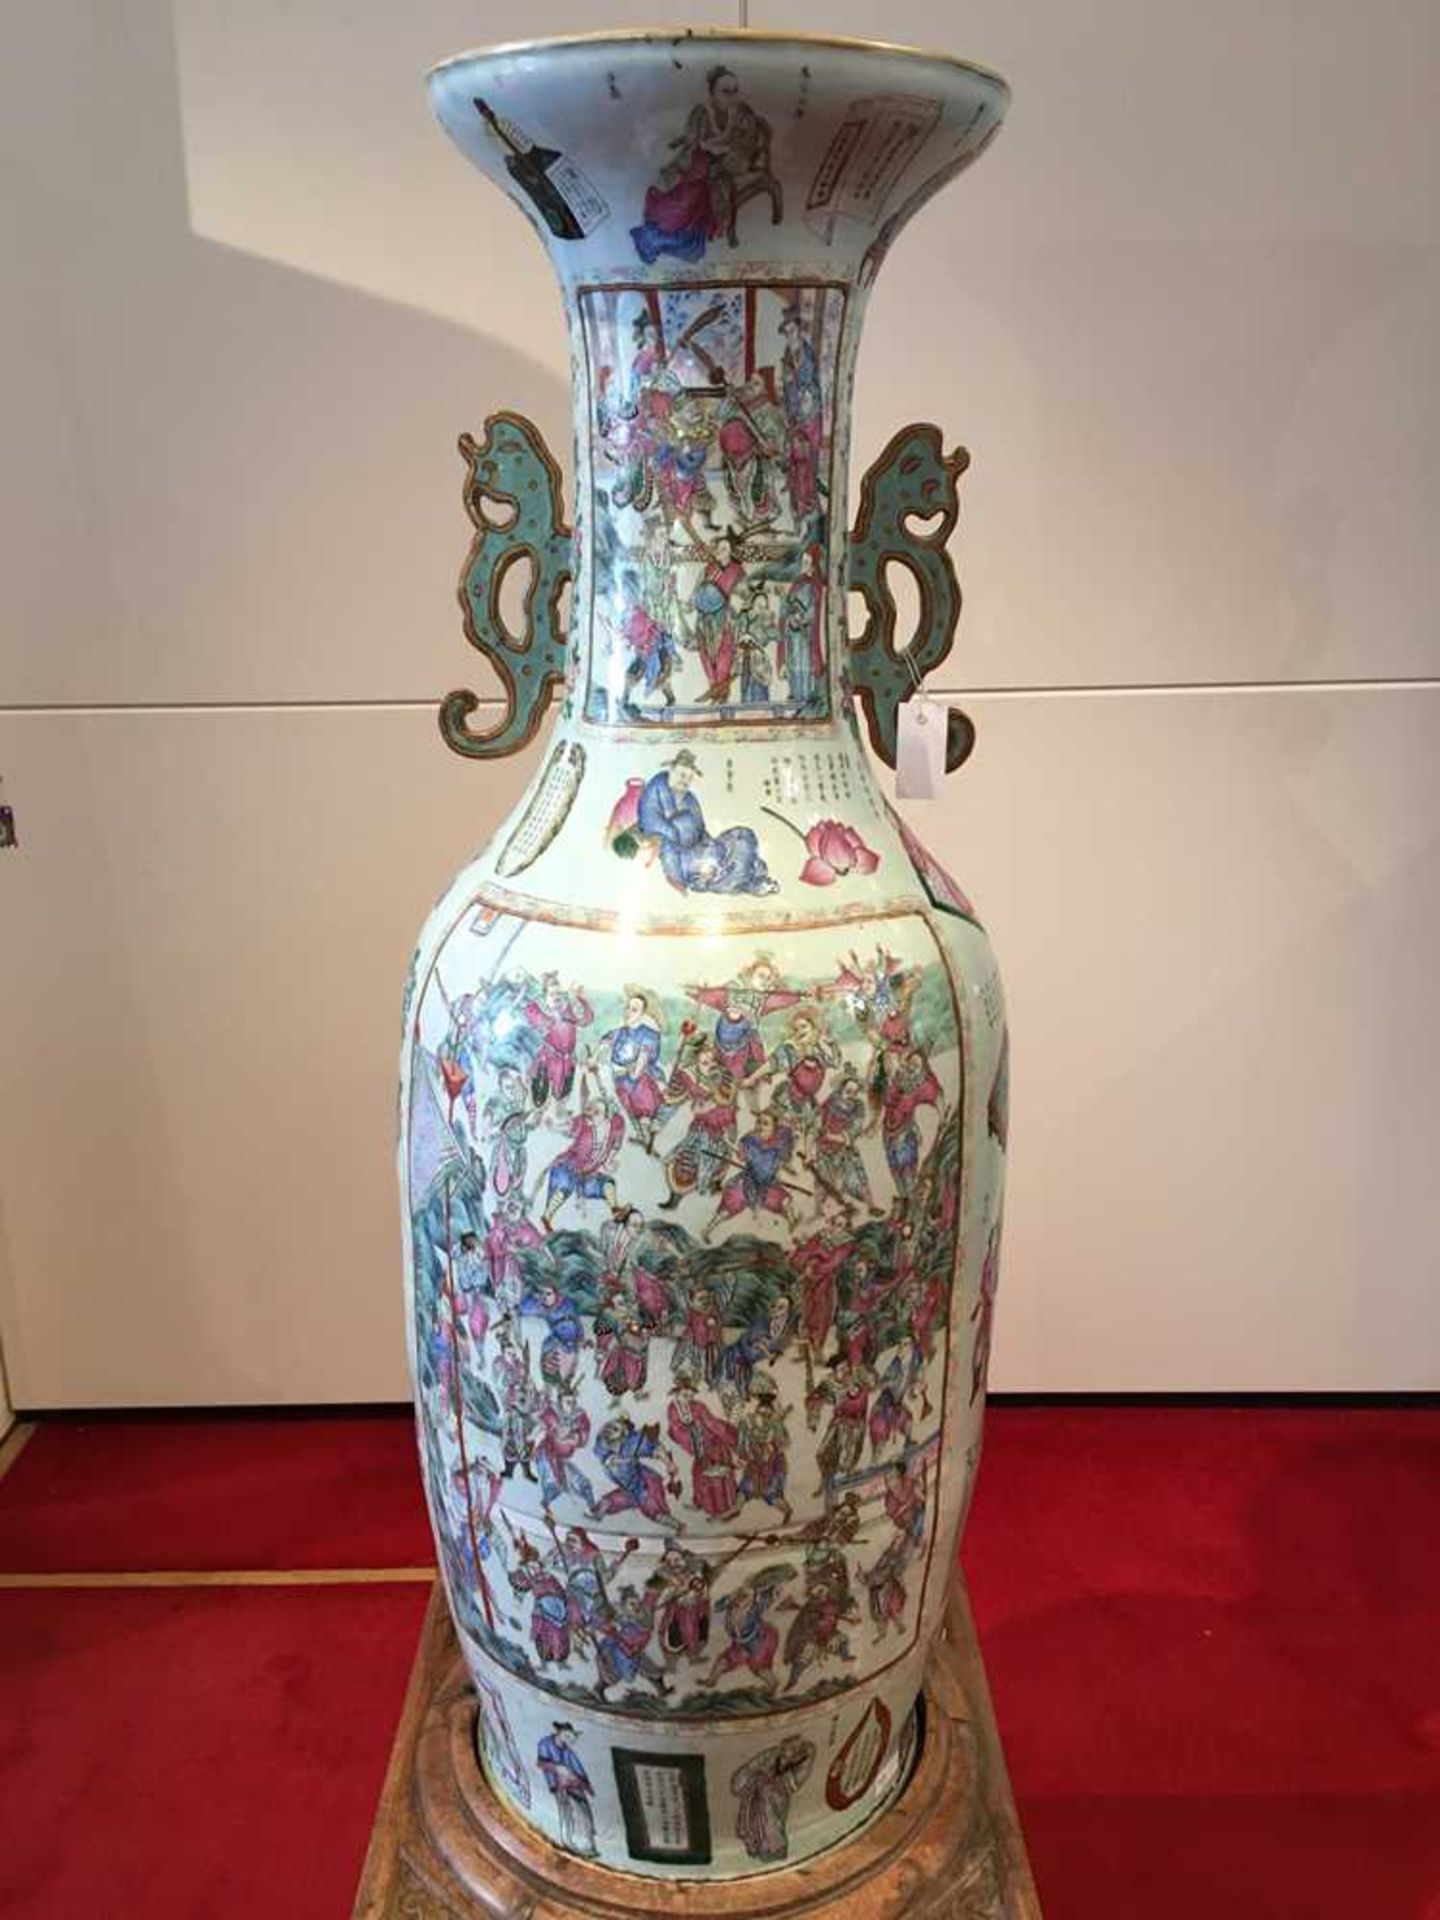 A PAIR OF MONUMENTAL CANTONESE FAMILLE ROSE PORCELAIN FLOOR VASES QING DYNASTY, EARLY 19TH CENTURY - Image 63 of 78